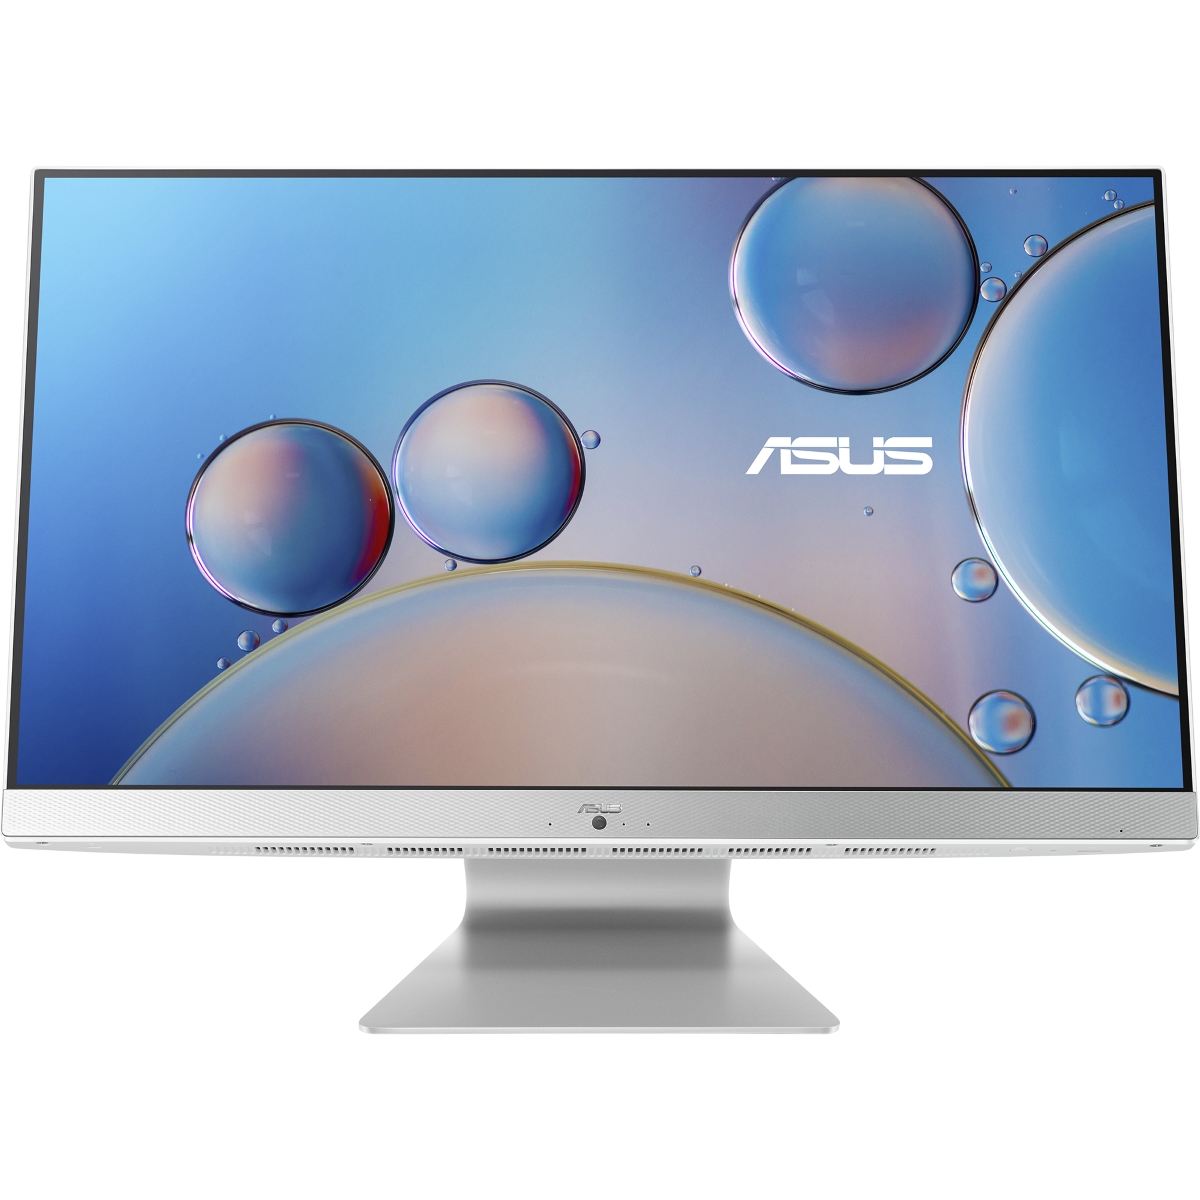 ASUS All-in-one PC M3700 27